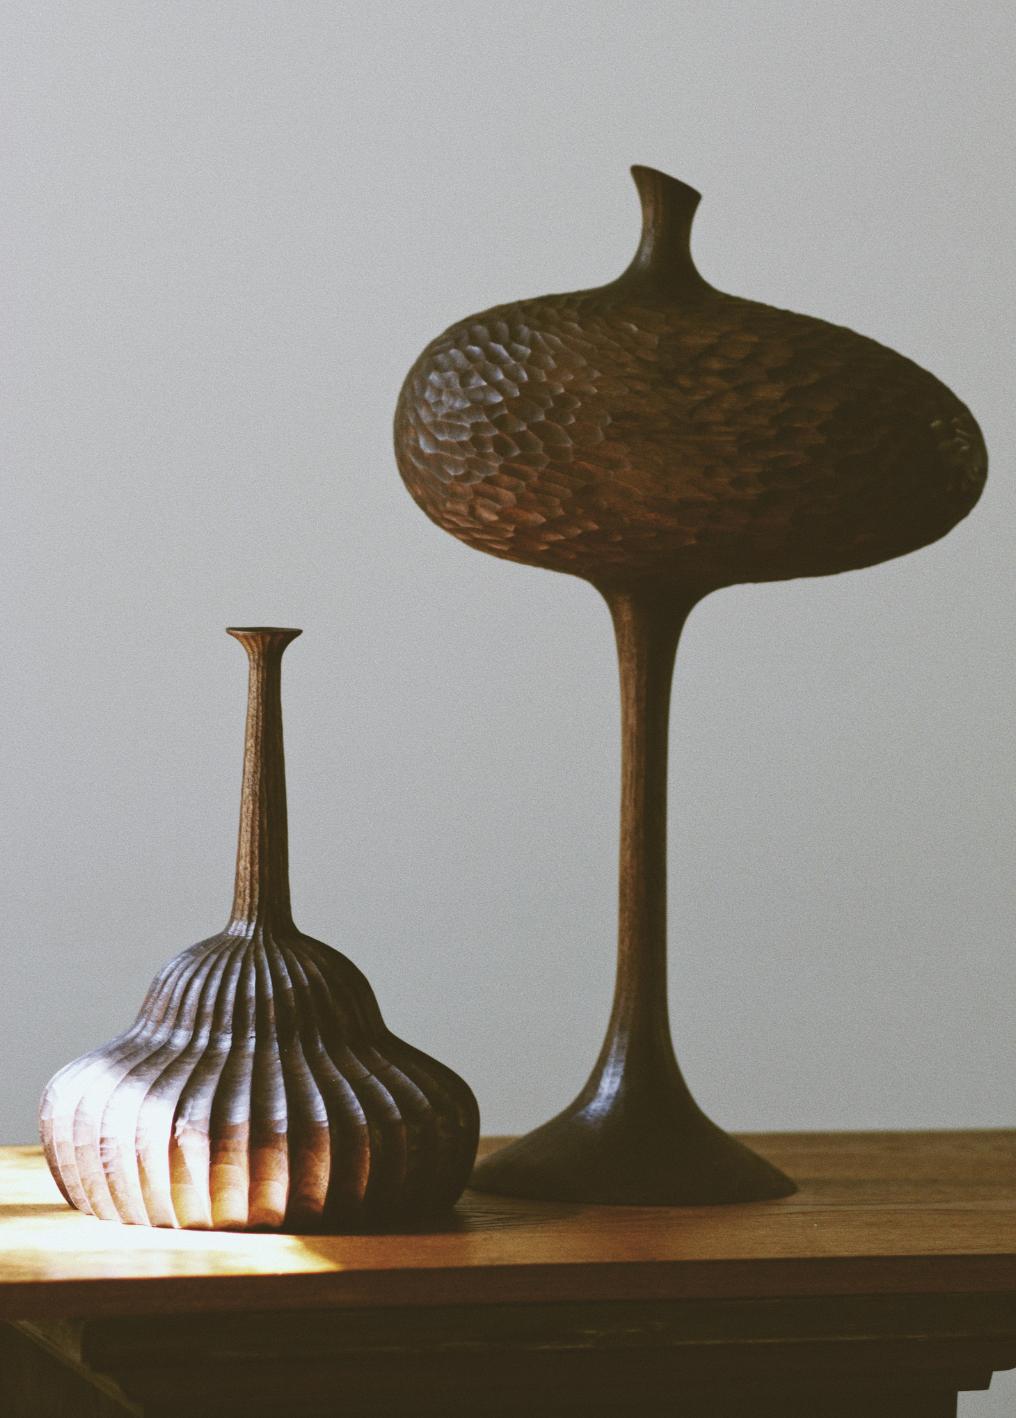 A collection of sculptural wooden objects on a wooden tabletop against a white background 